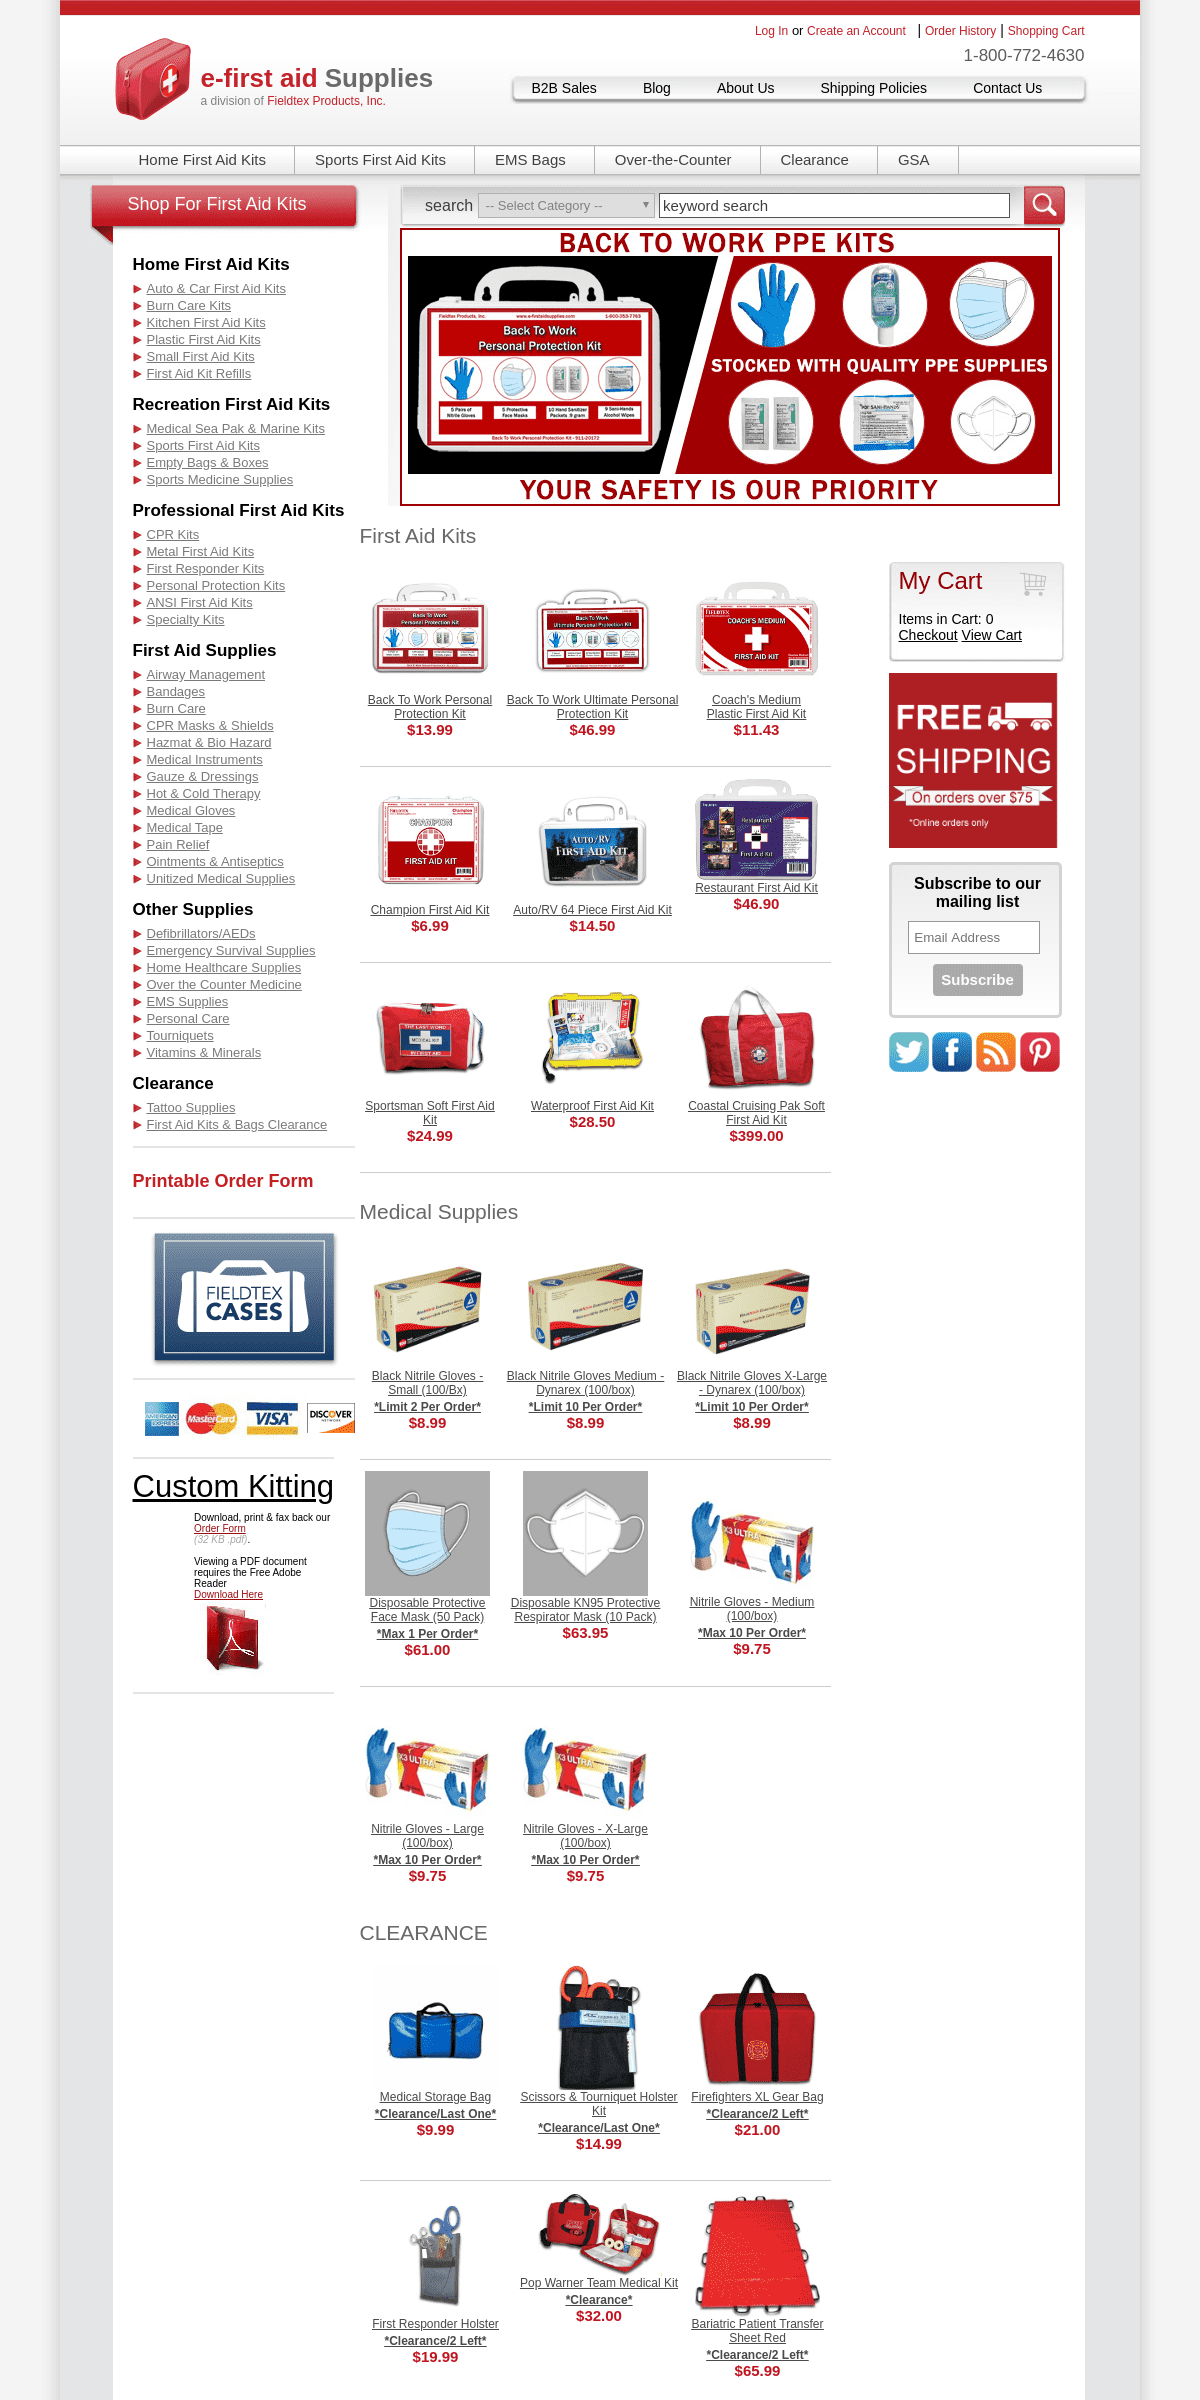 A complete backup of e-firstaidsupplies.com